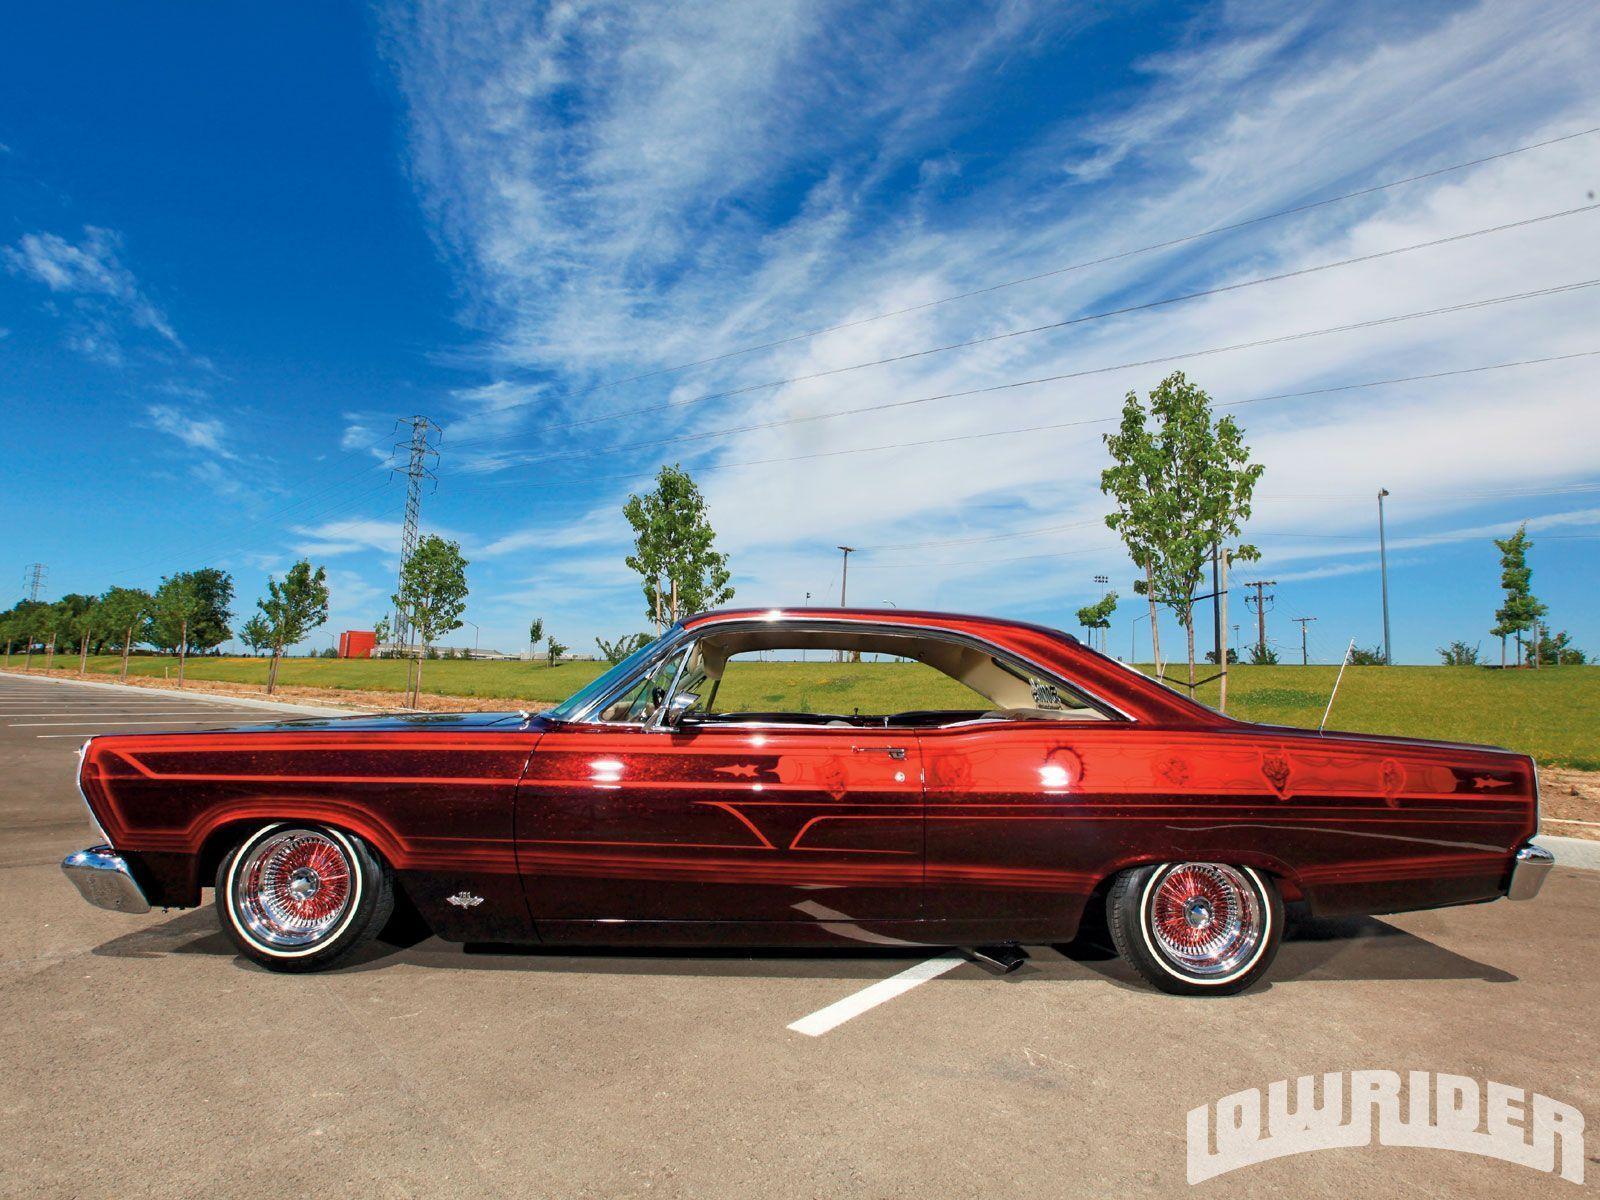 Red Lowrider Cars Image & Picture